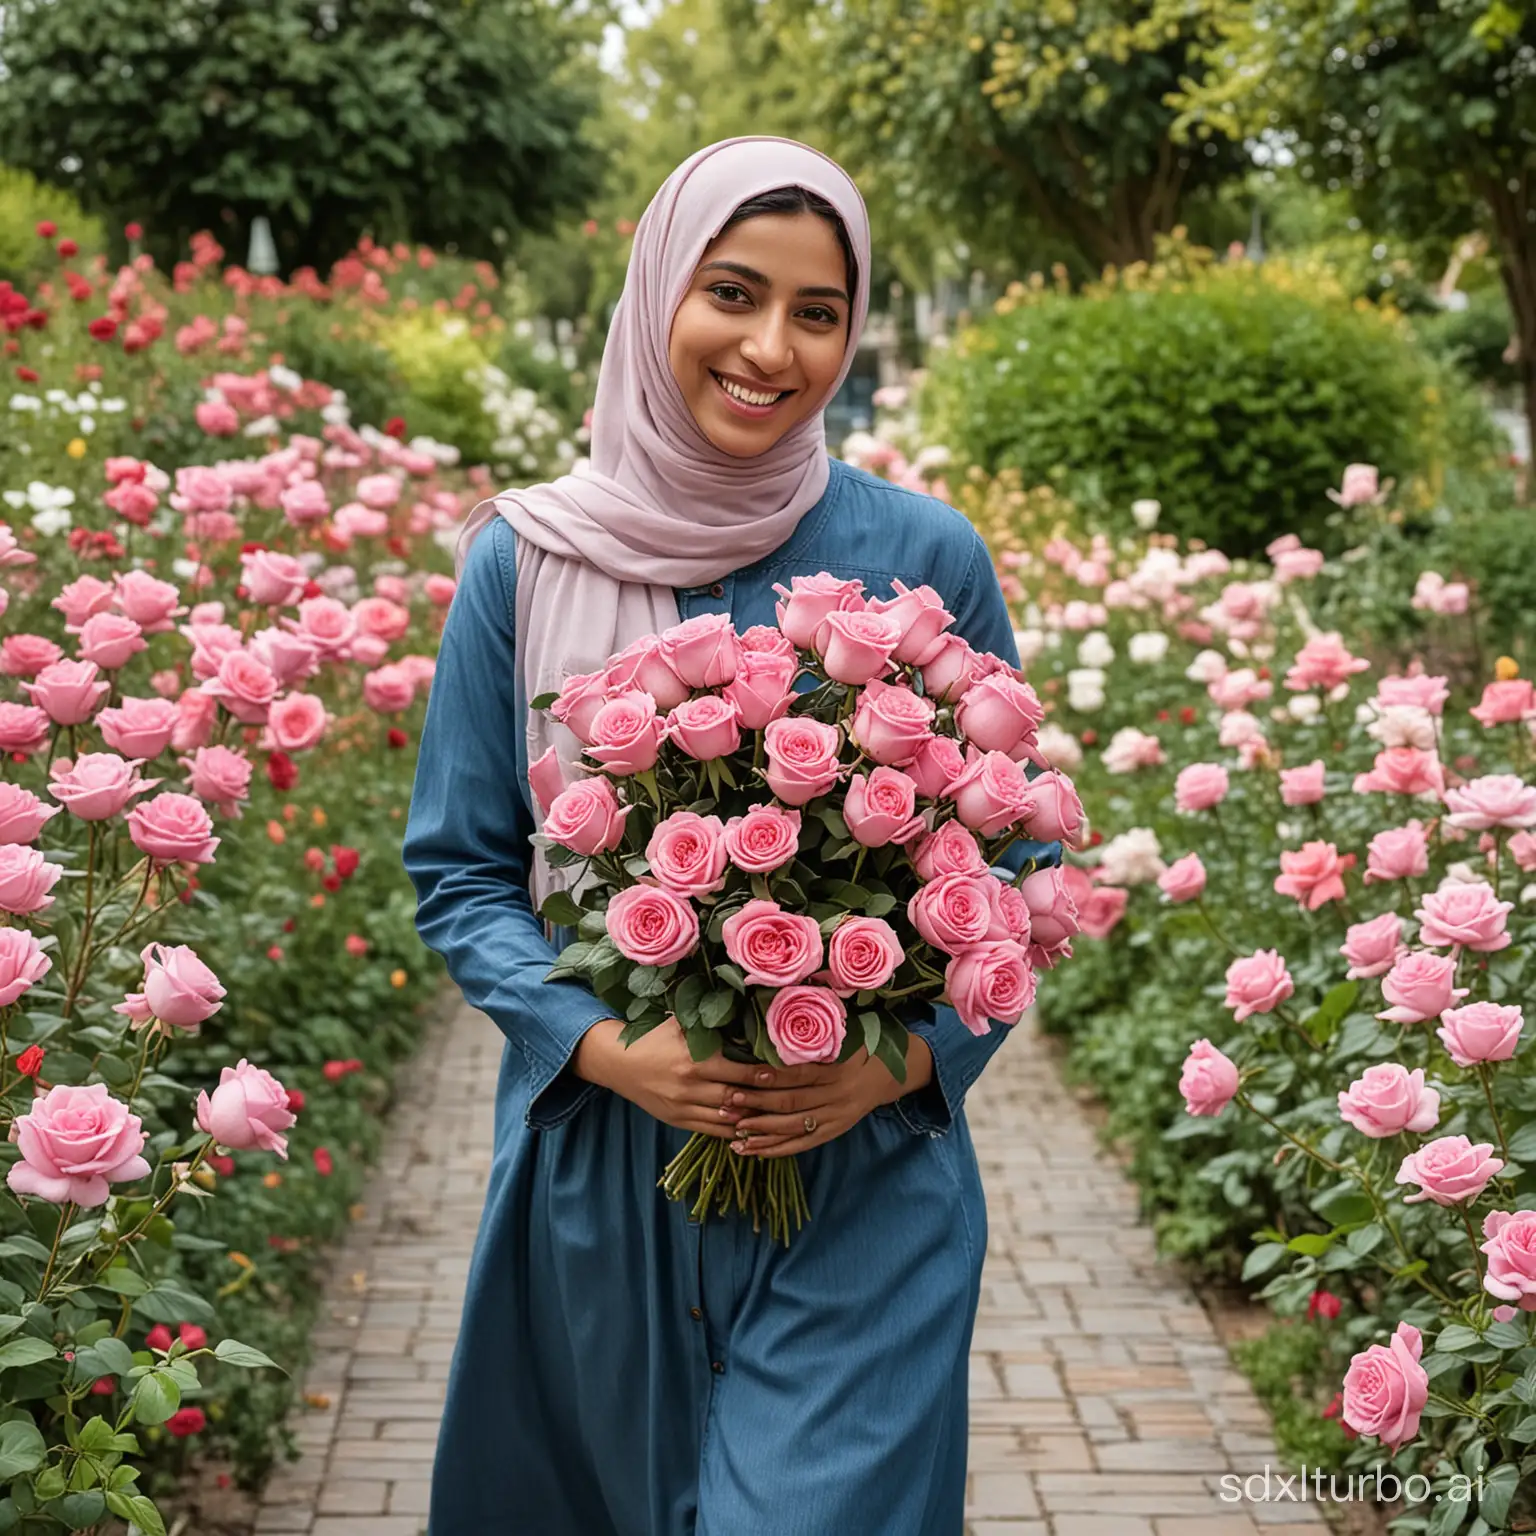 A 30-year-old Muslim woman wearing a denim-colored Islamic dress walks, smiling, holding a bunch of pink roses, with a background of a beautiful flower garden with various types of flowers